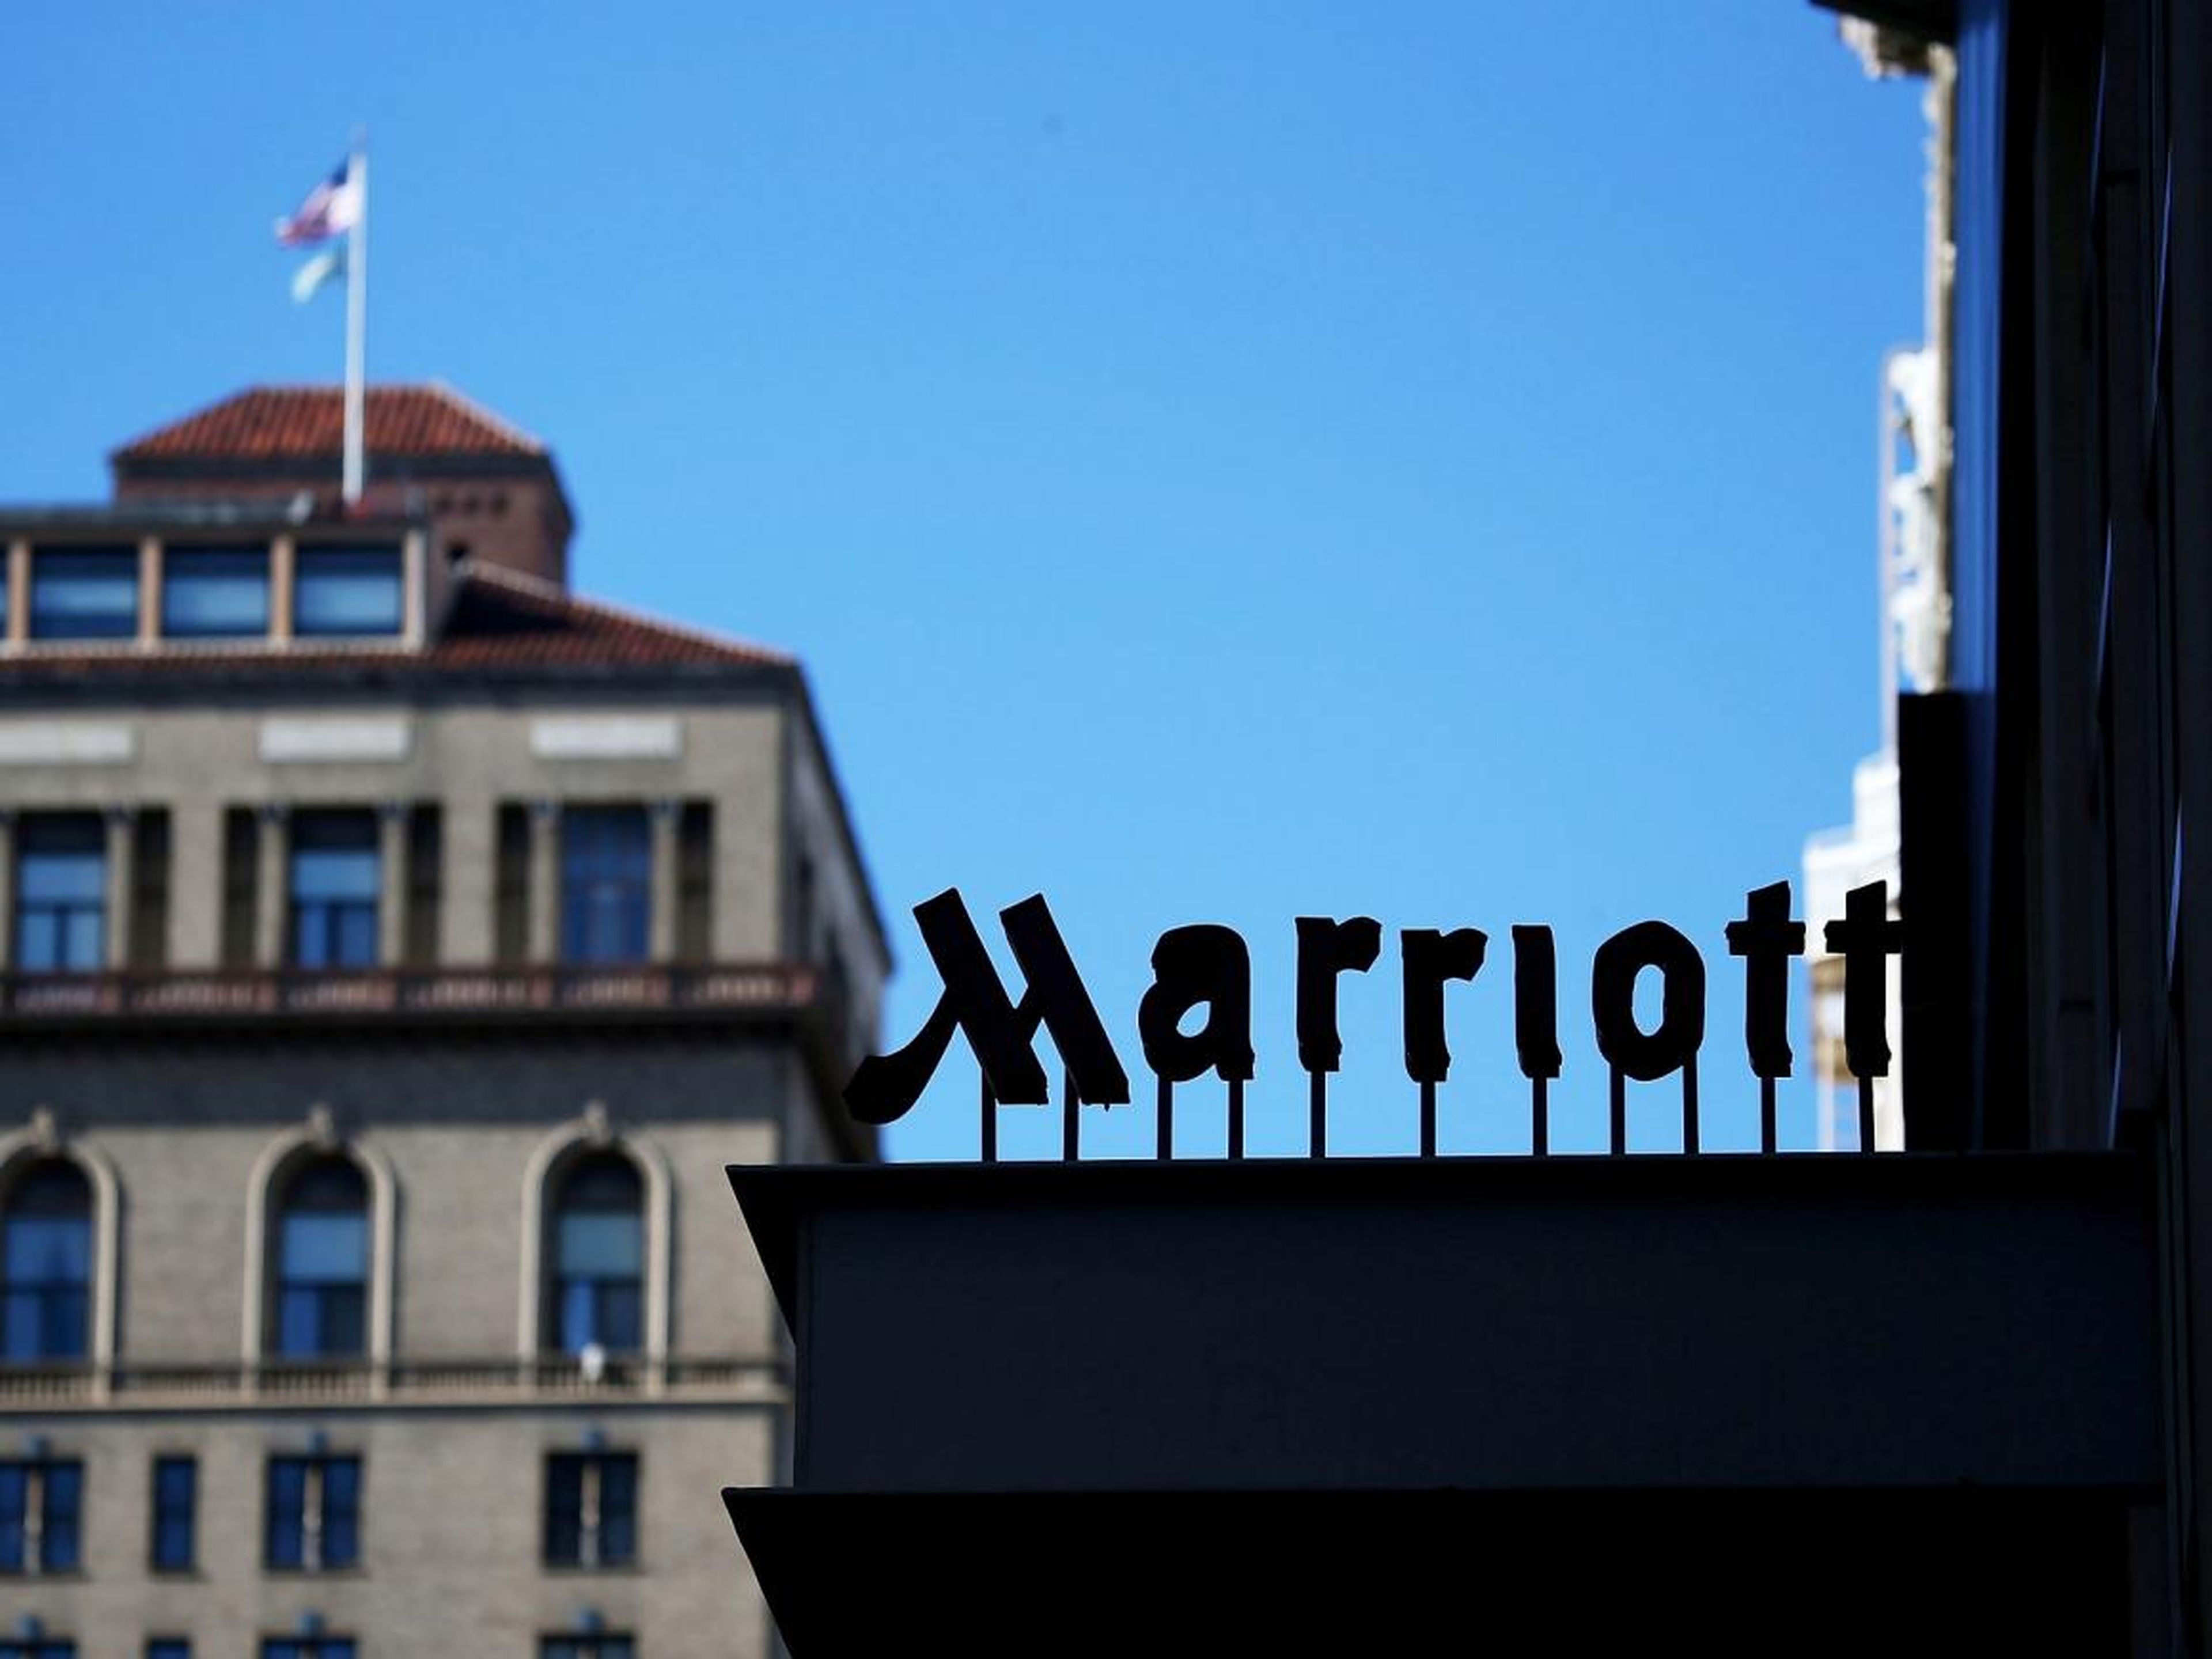 3. Hackers broke into Marriott's reservation system in 2018, accessing 500 million guests' private information.